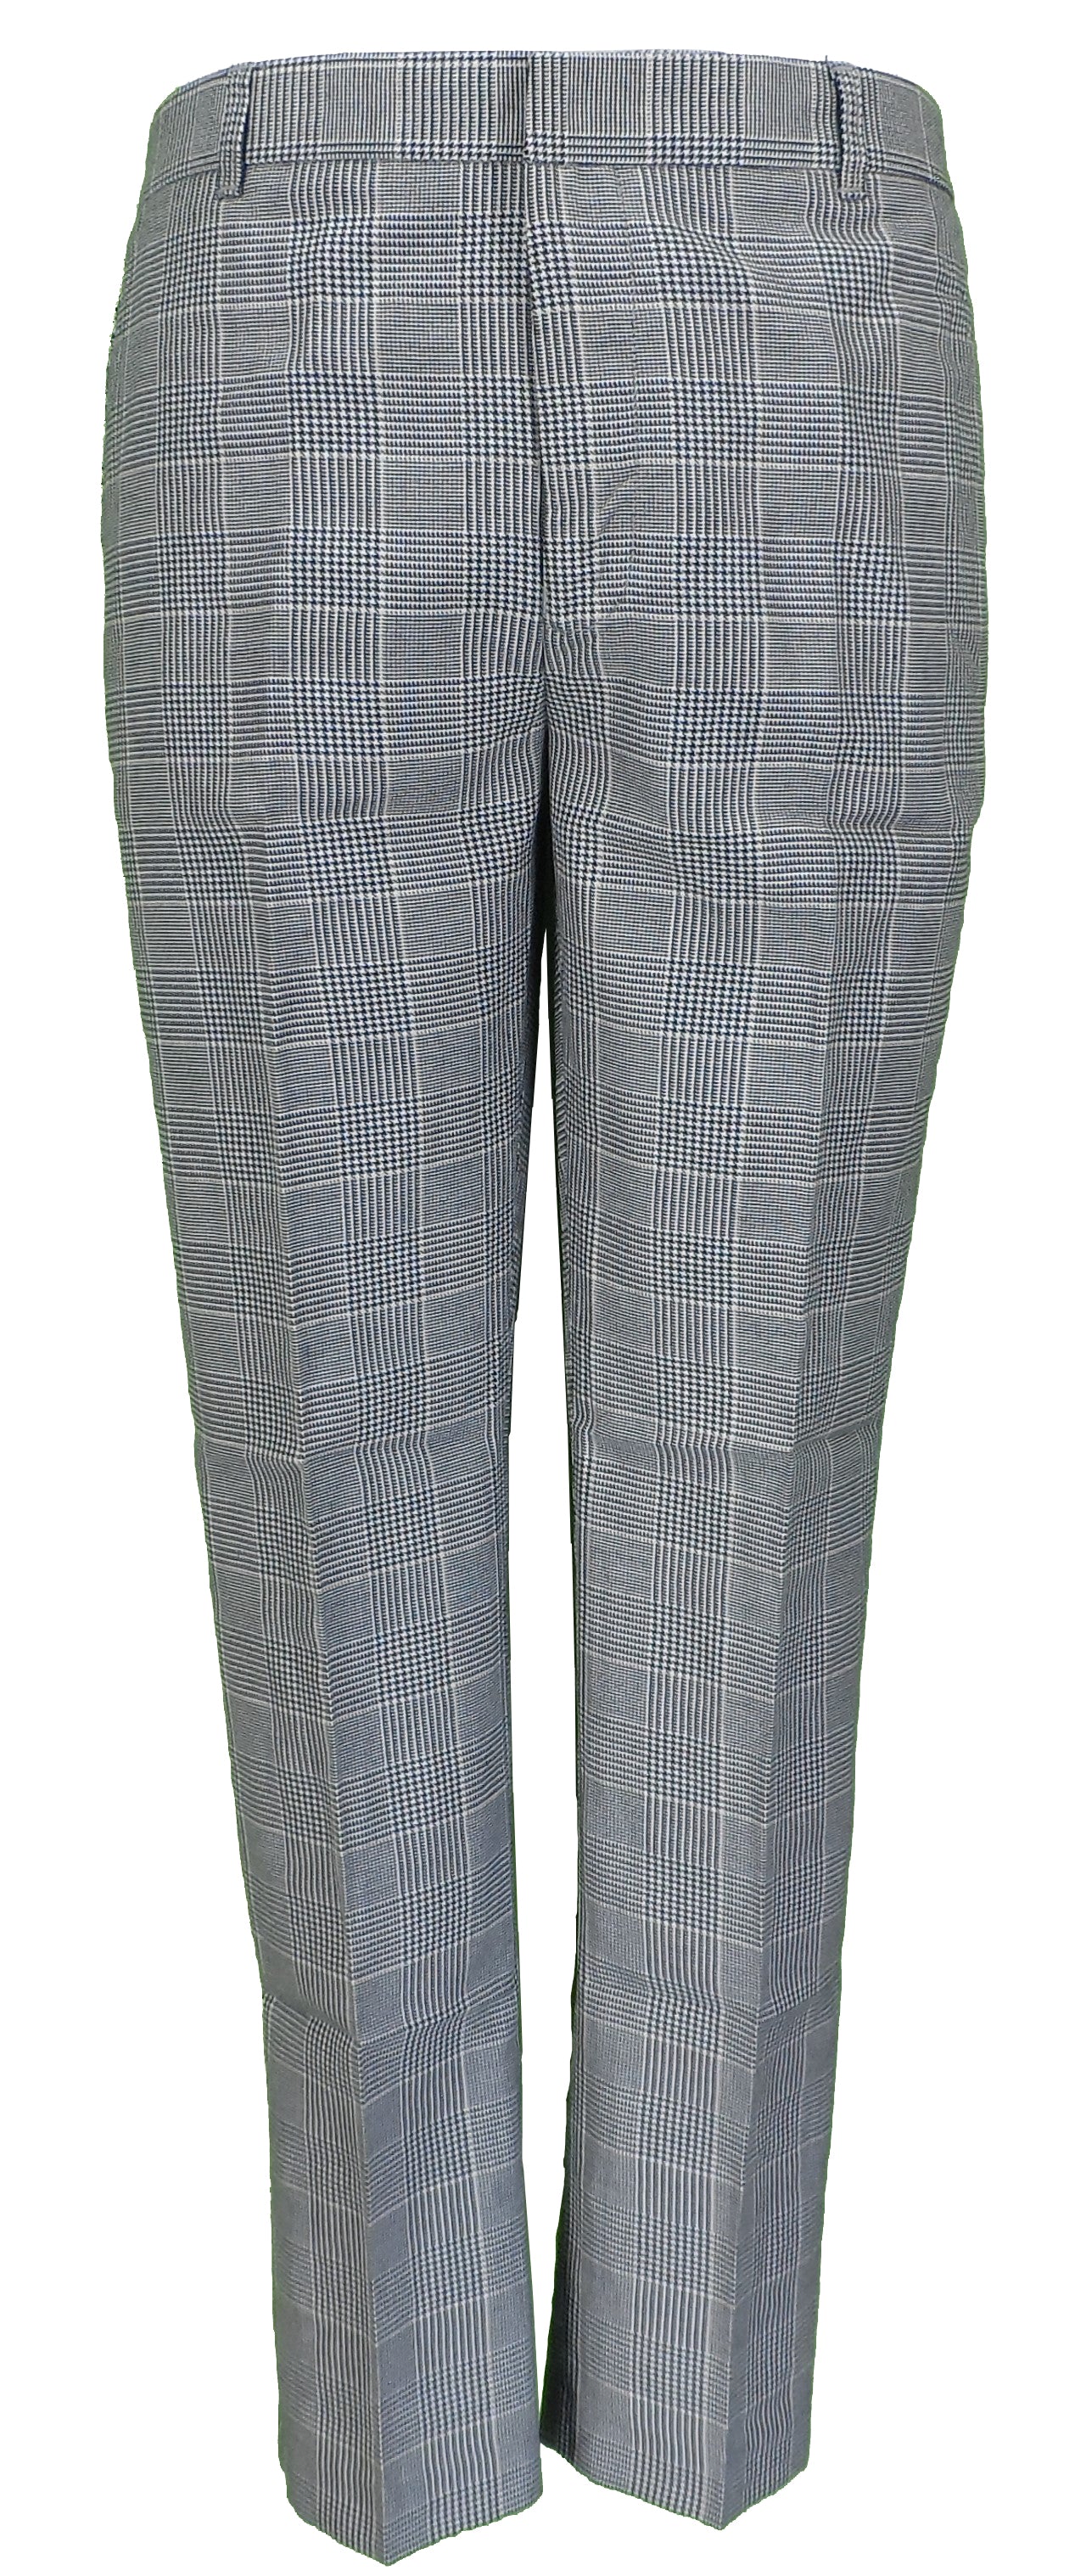 Run & Fly Mens 60s Vintage Retro Mod Checked Prince of Wales Tartan Skinny Fit Trousers